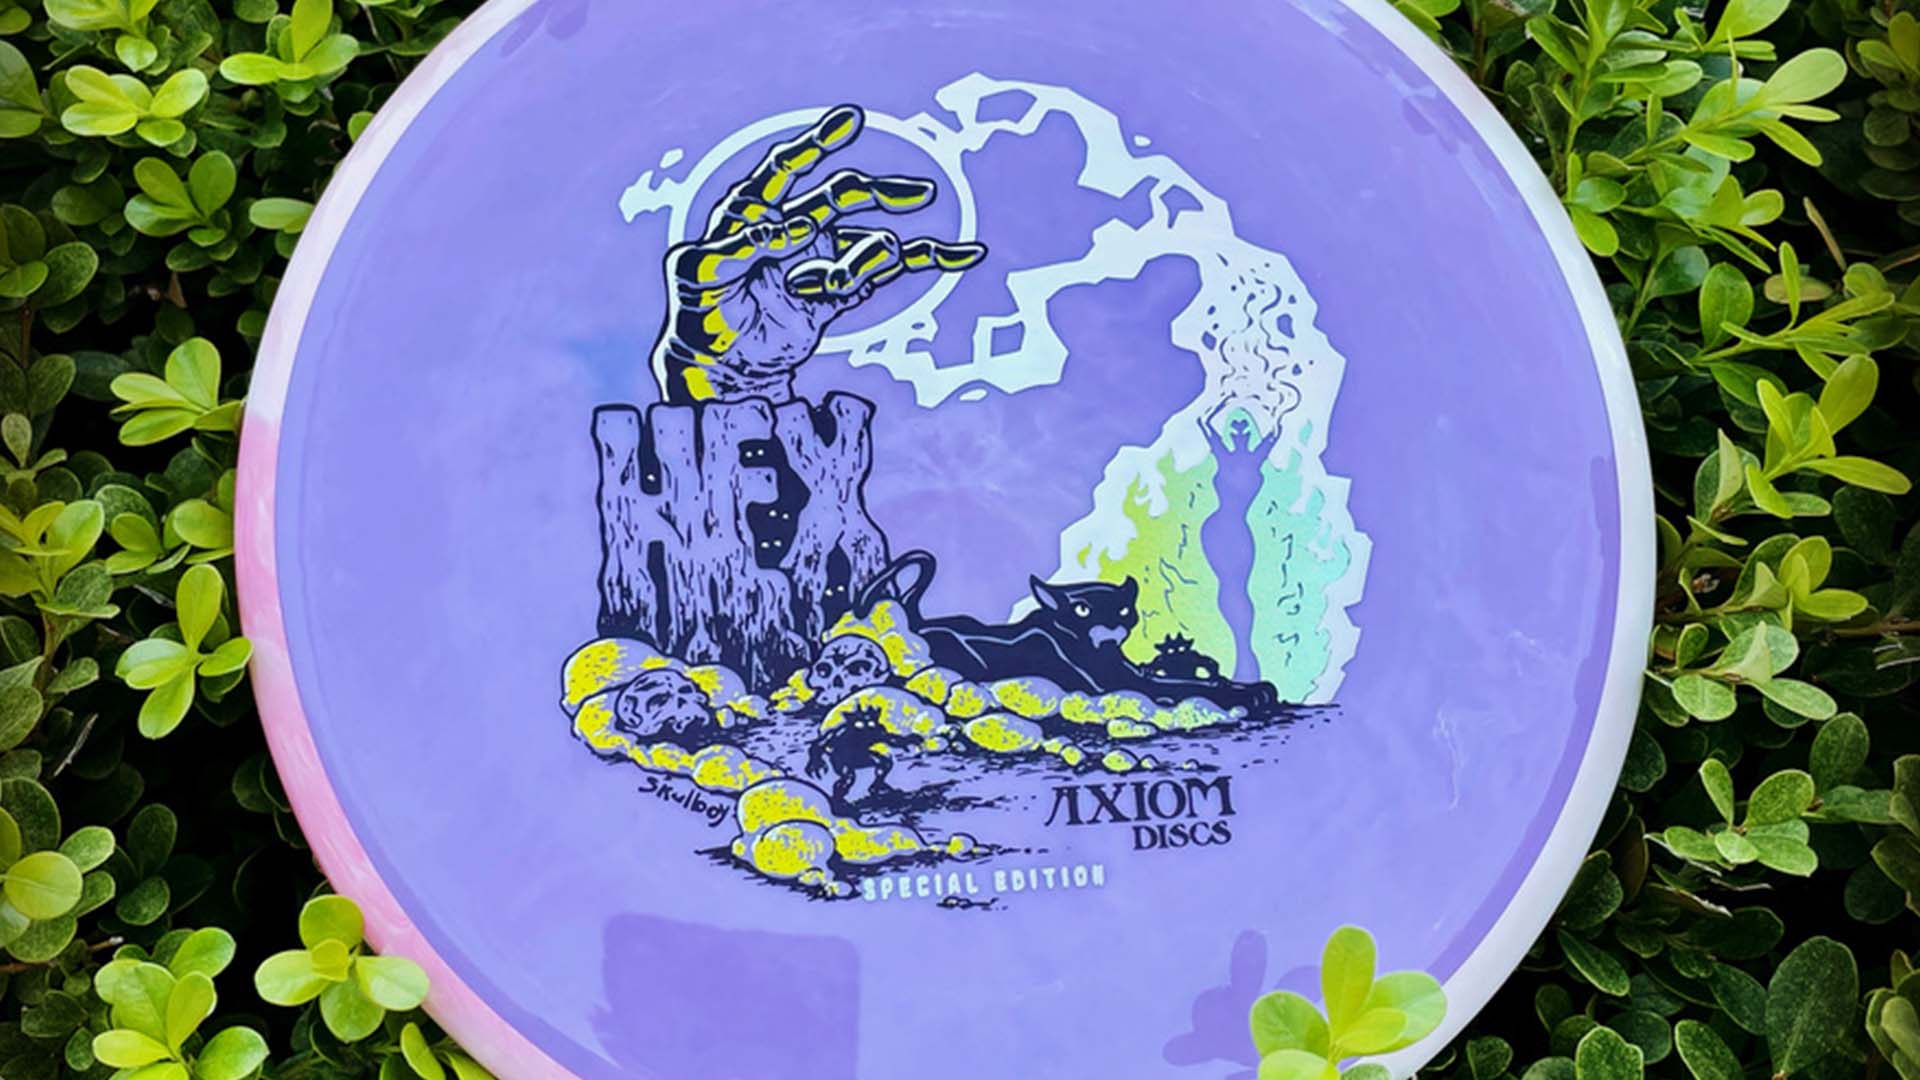 The Top 5 New Disc Golf Molds from 2021